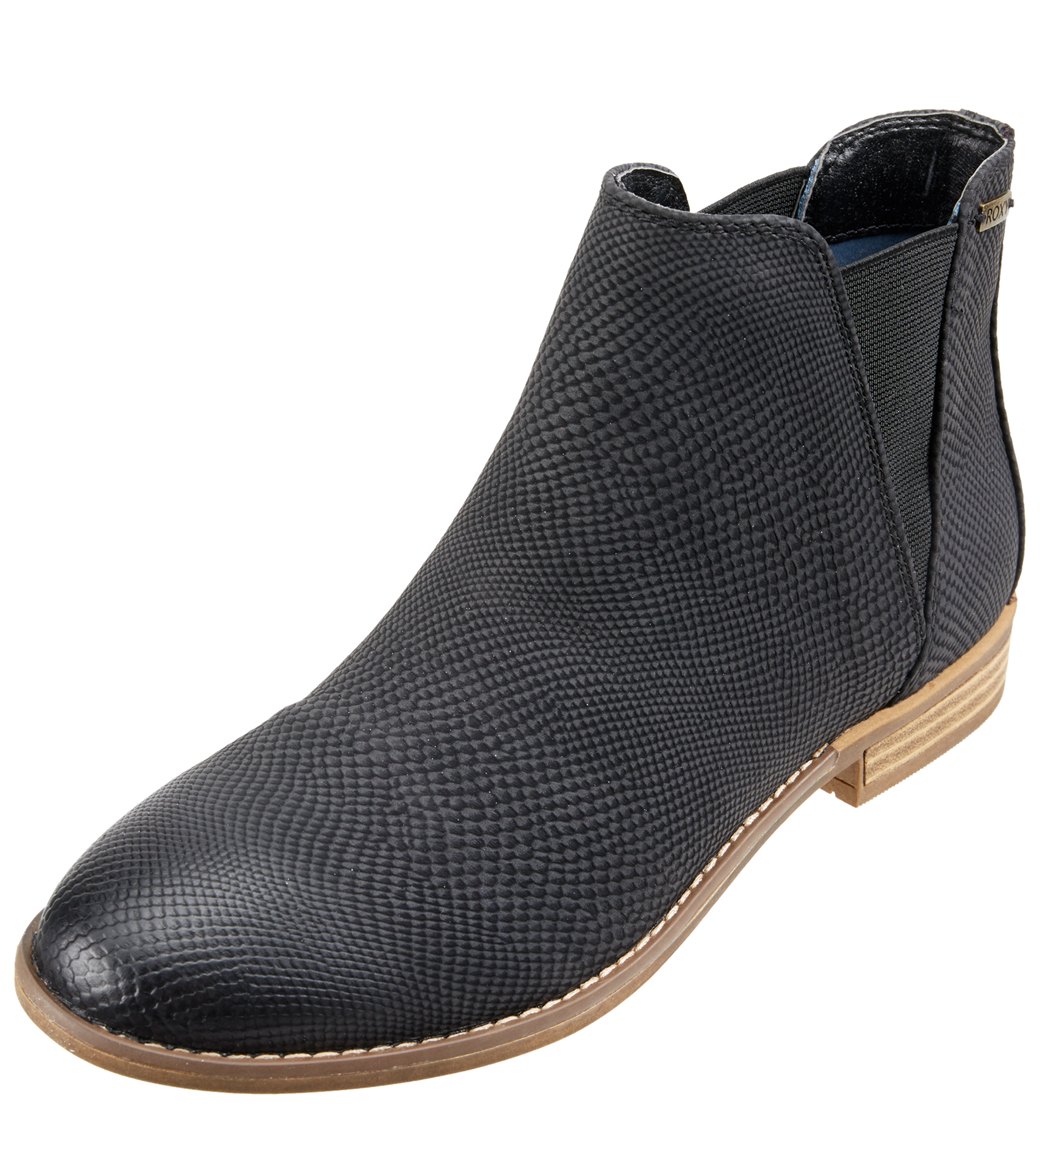 tommy hilfiger roxy faux leather chelsea boot